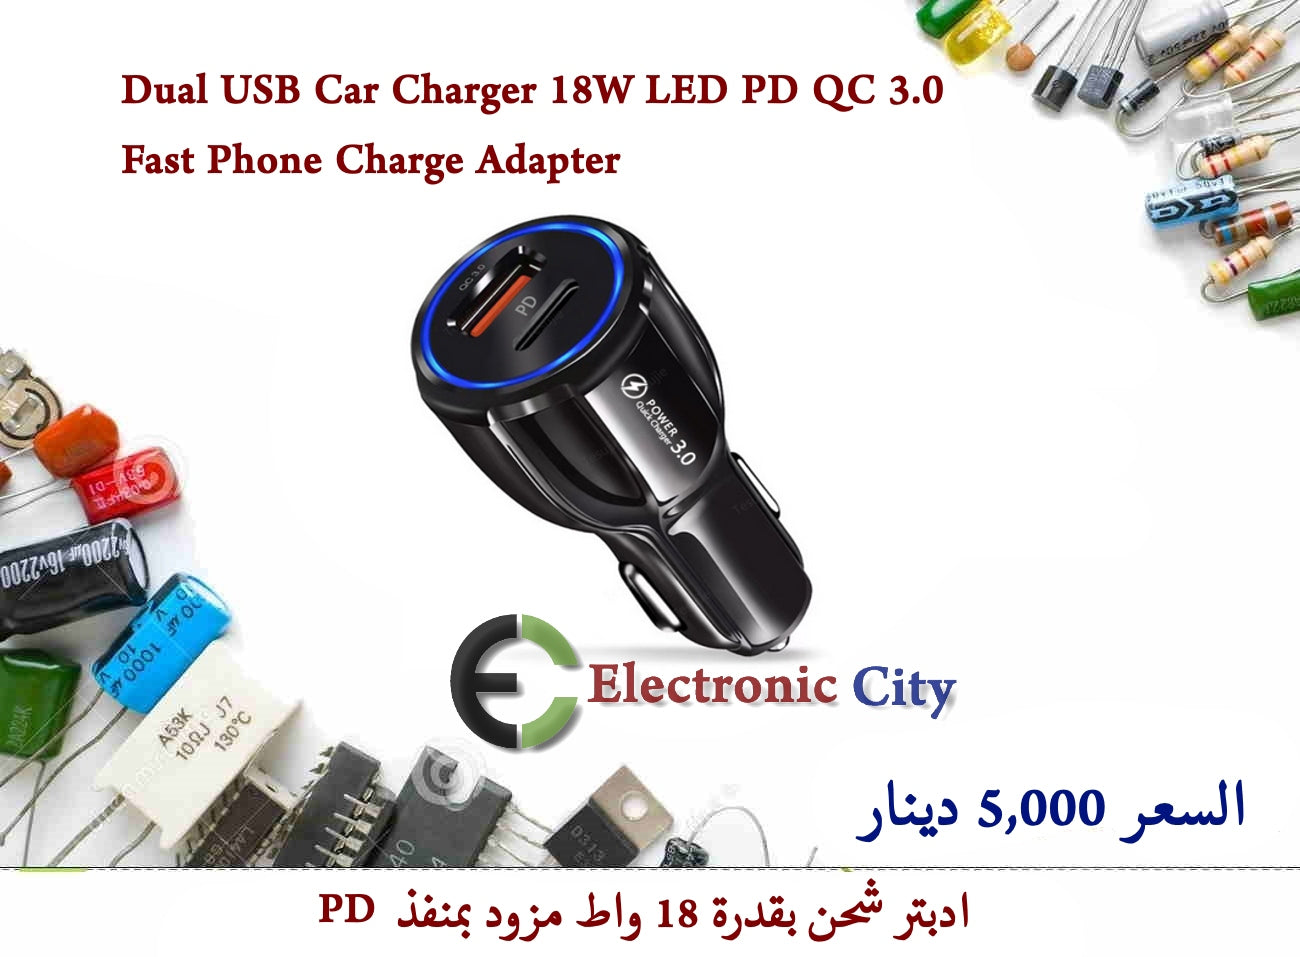 Dual USB Car Charger 18W LED PD QC 3.0 Fast Phone Charge Adapter